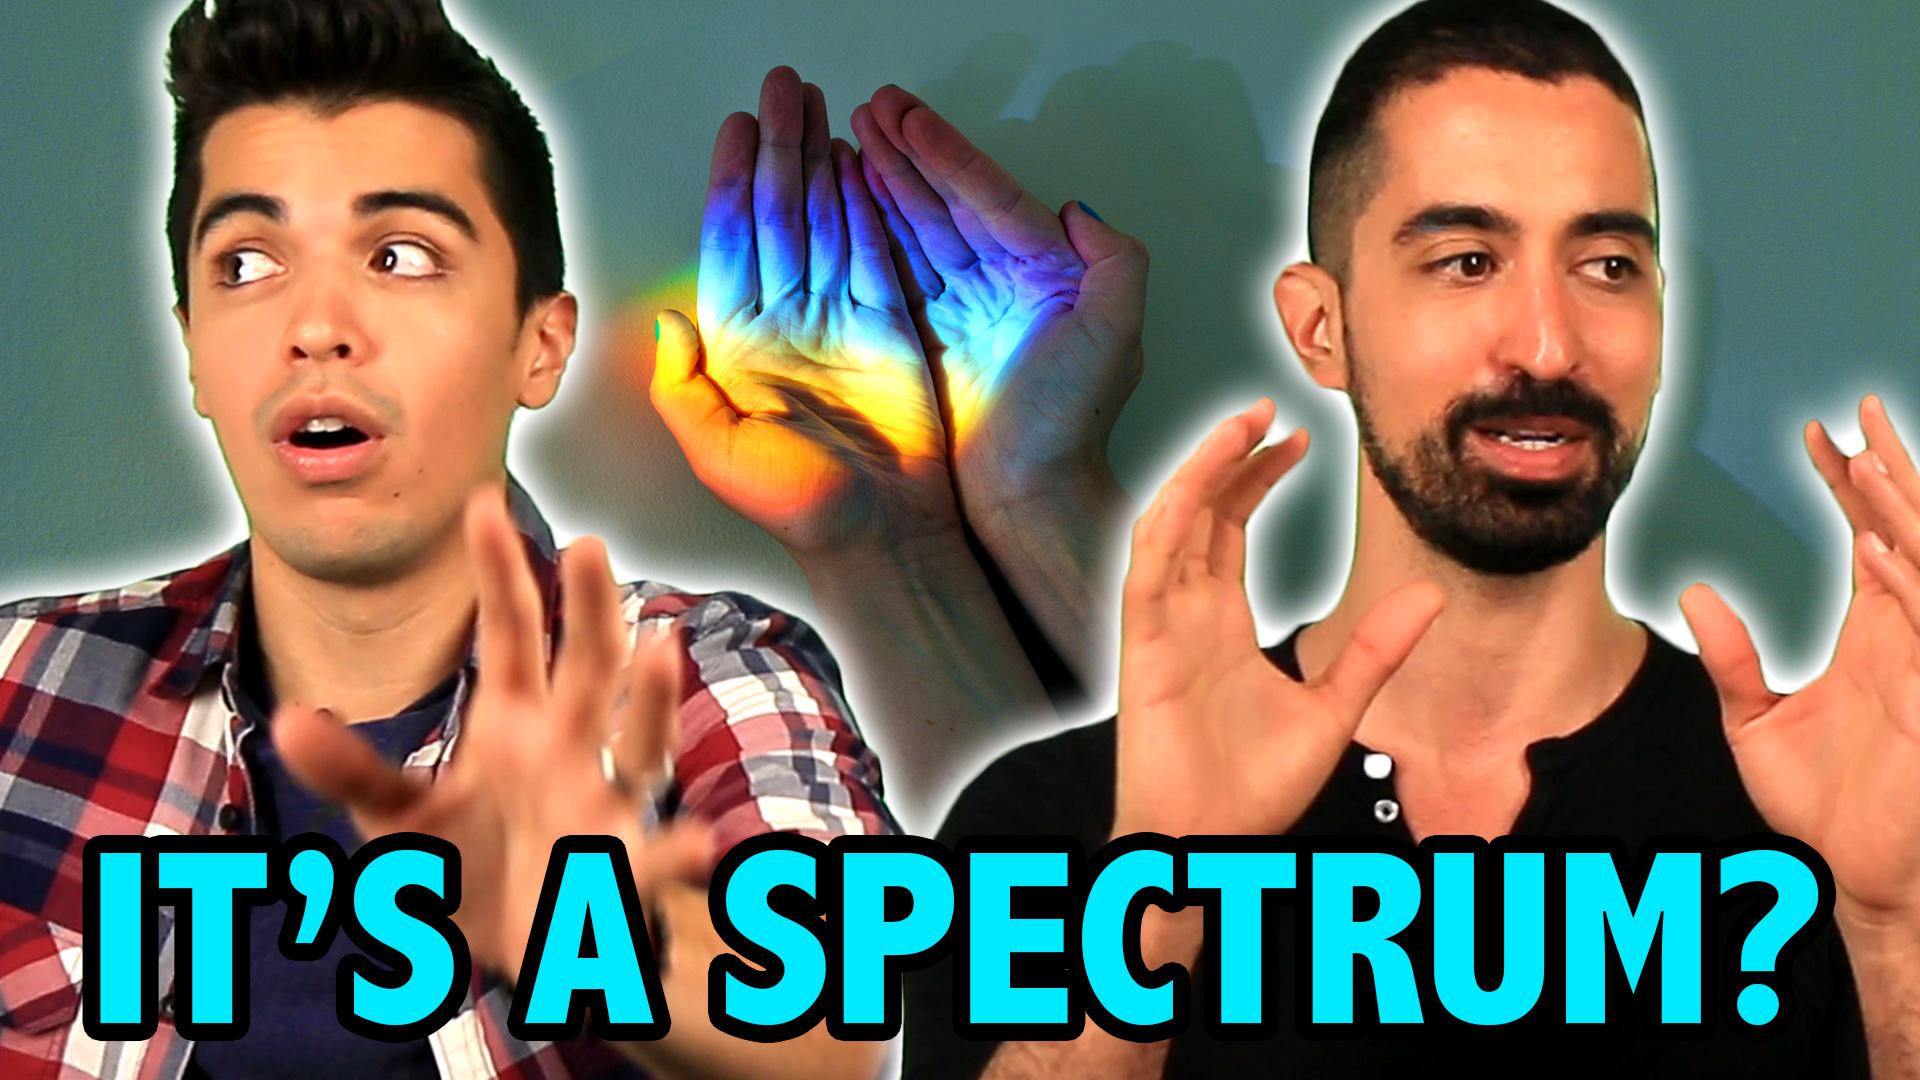 Gay Men Answer Sex Questions You're Too Afraid To Ask